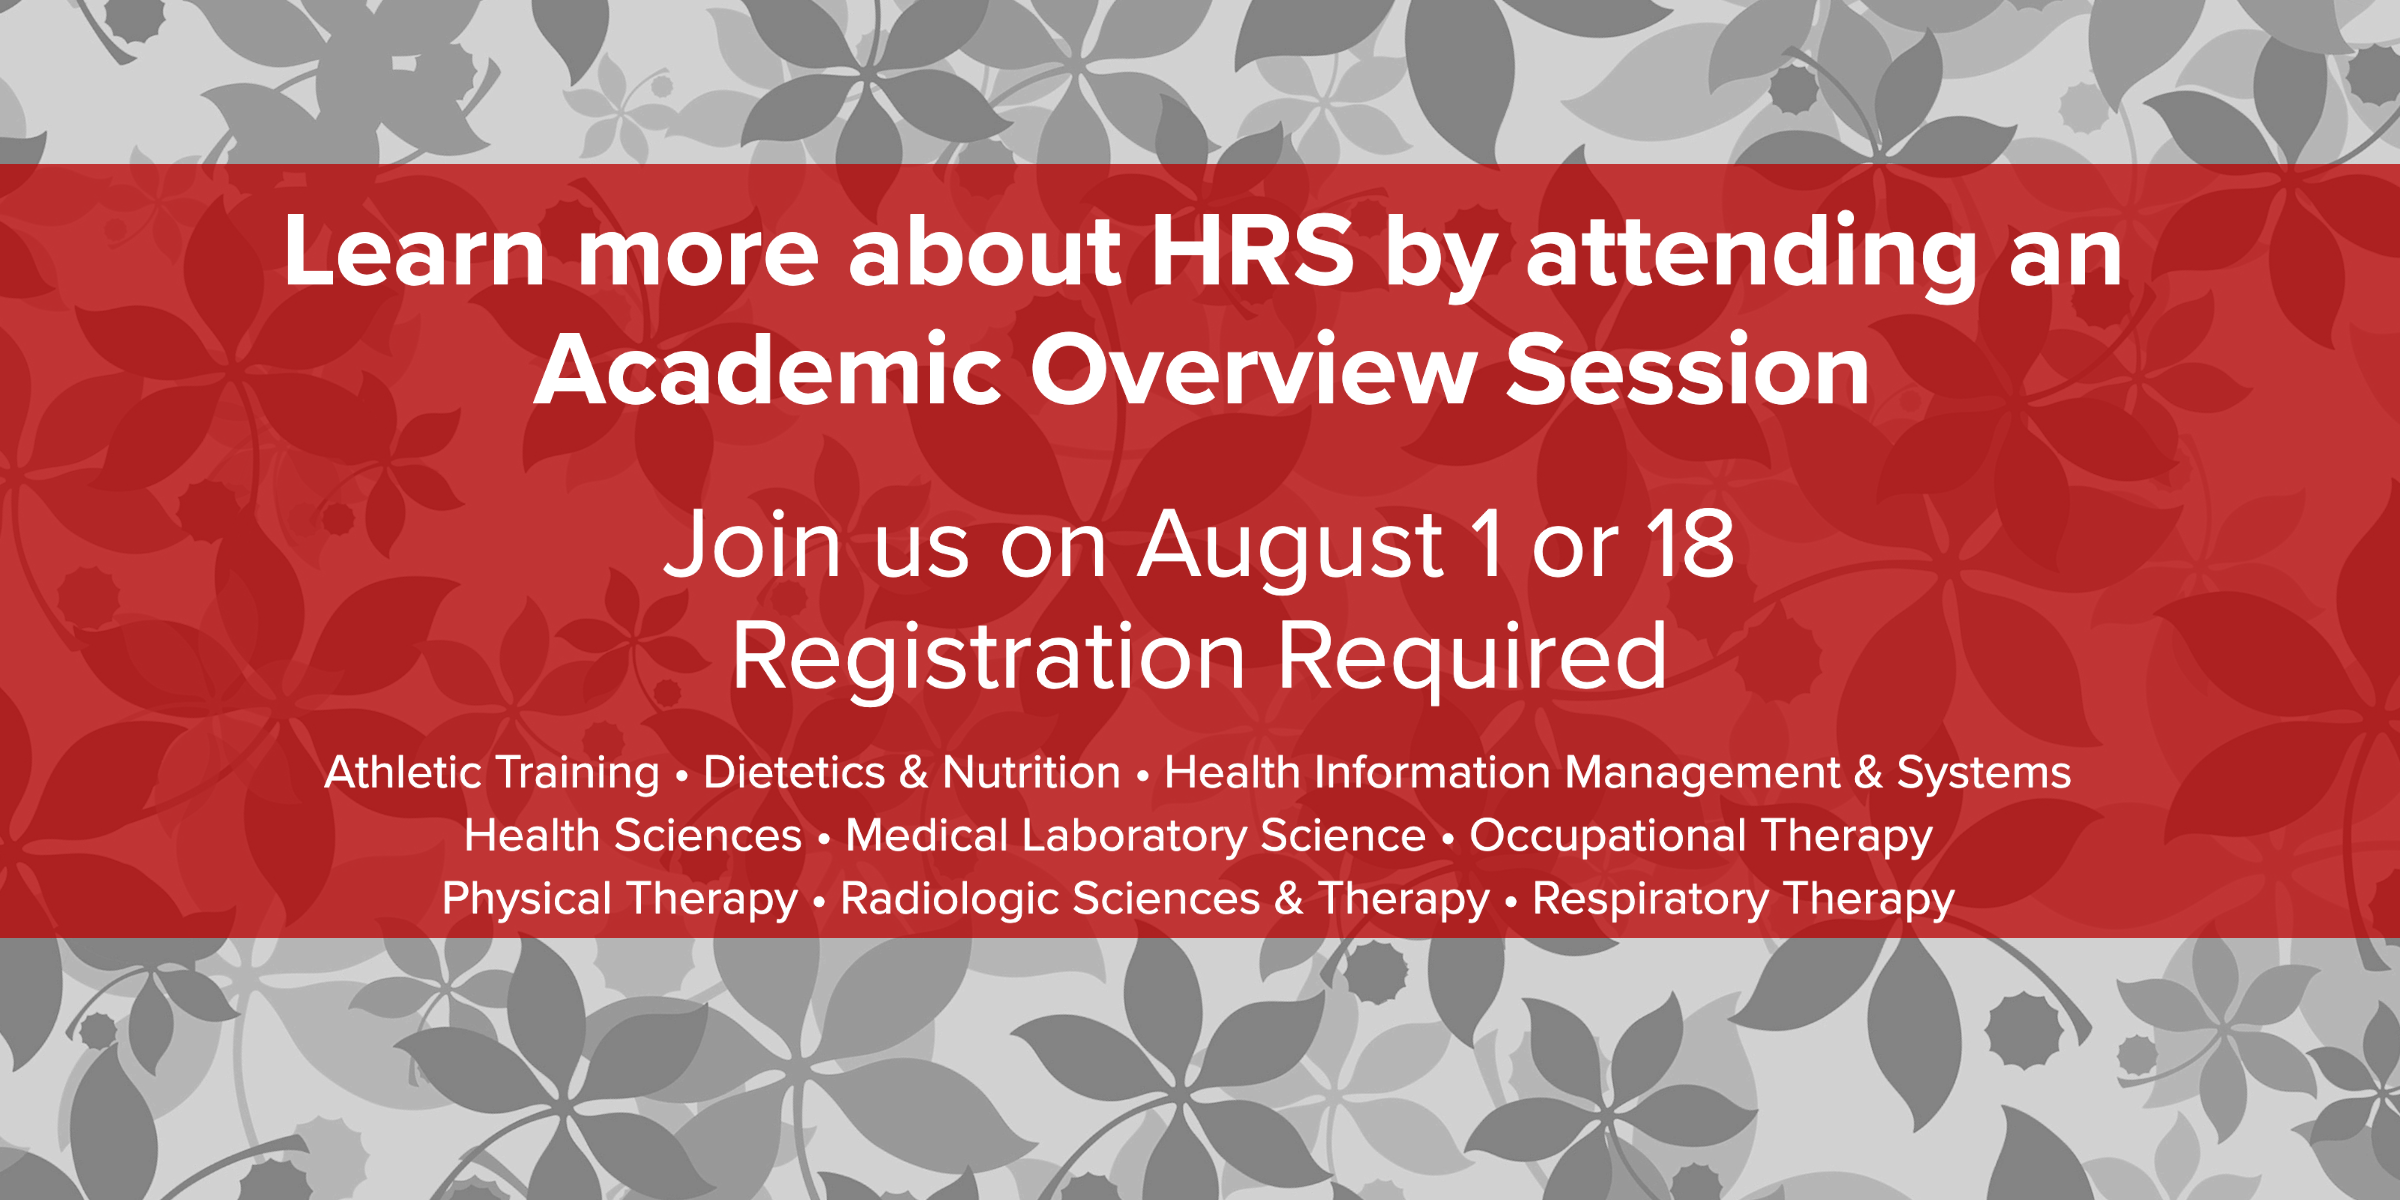 HRS Overview Session